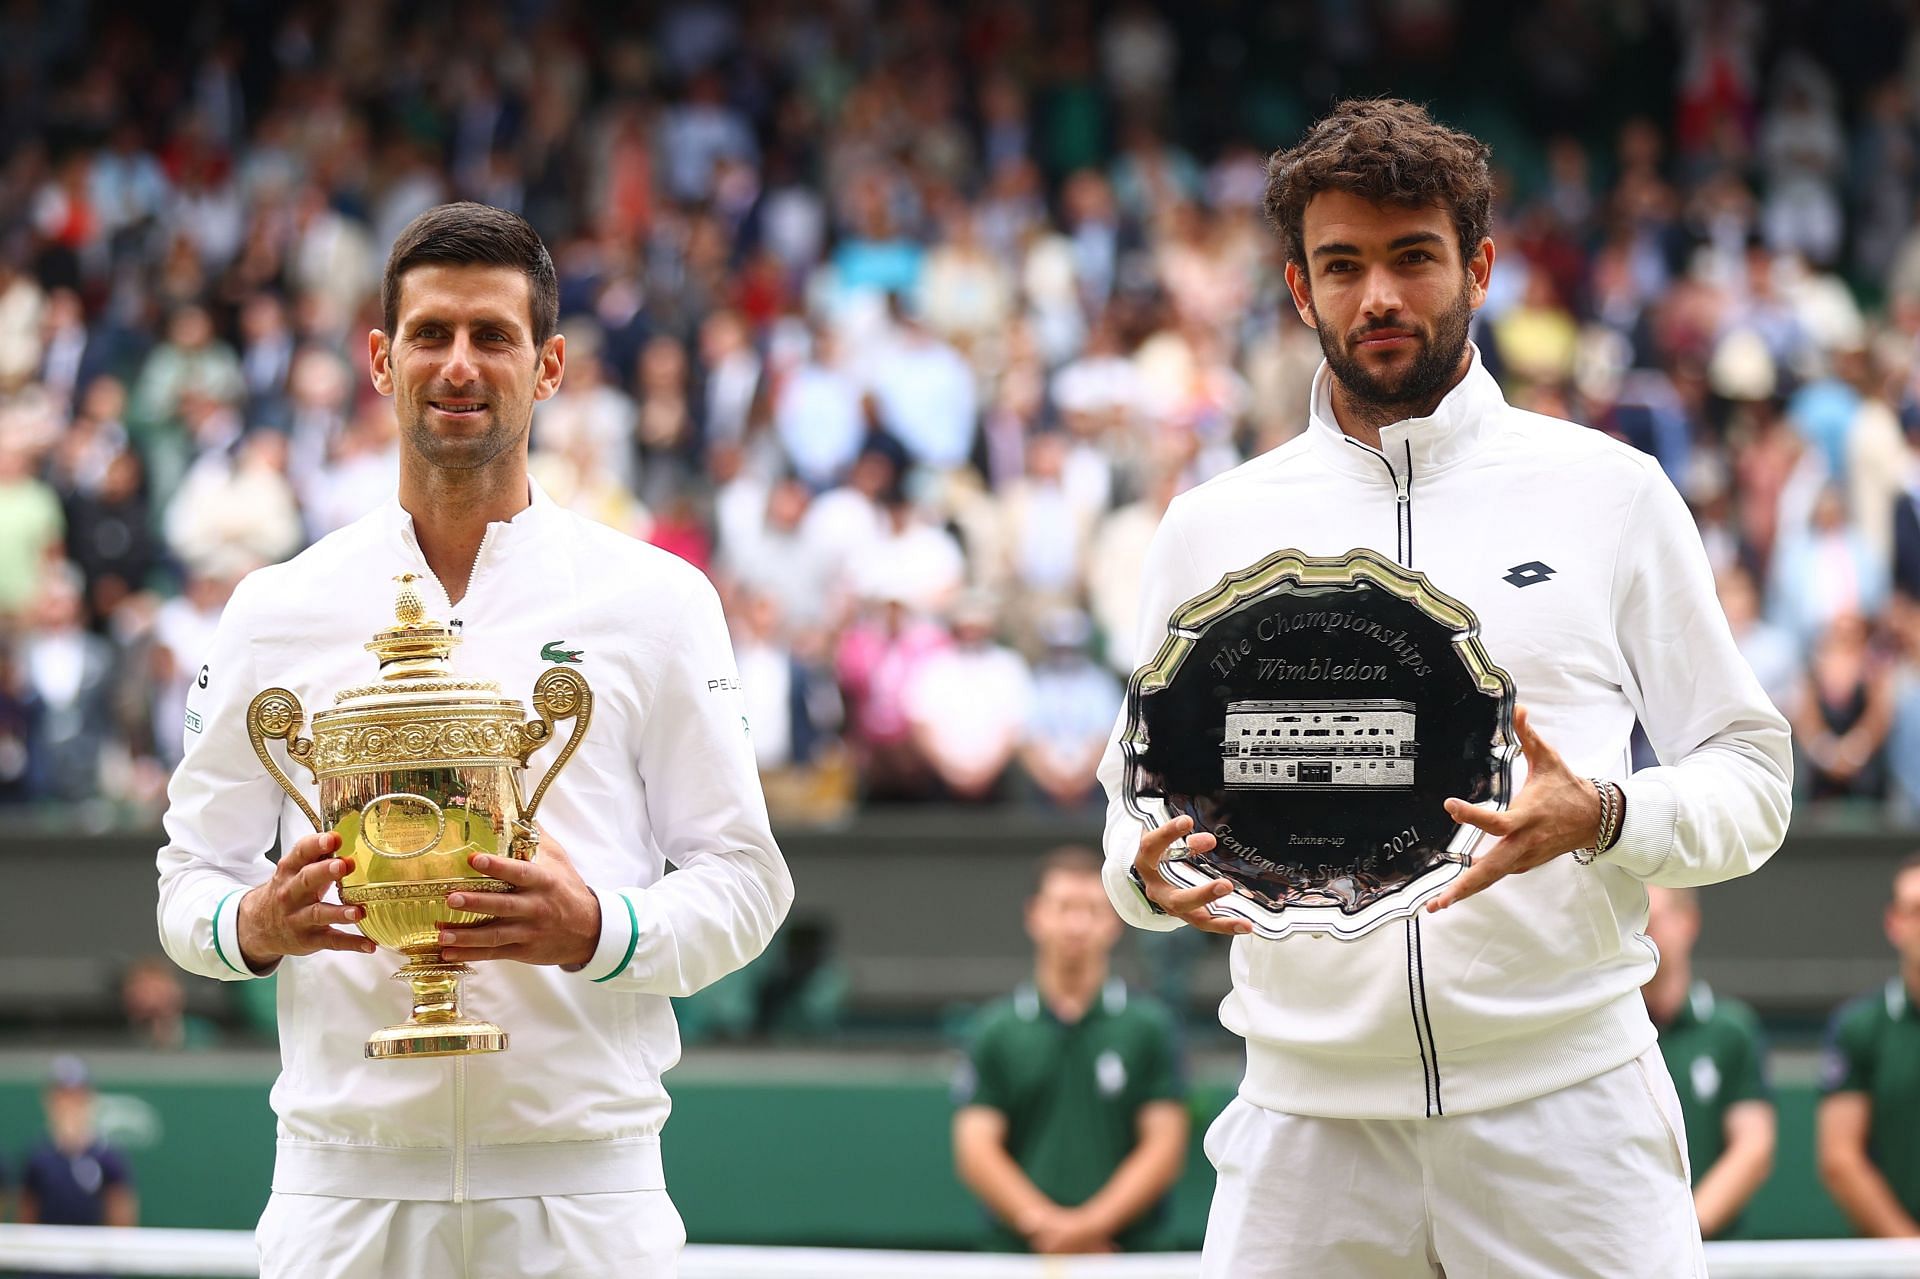 Novak Djokovic and Matteo Berrettini with their respective trophies after the Wimbledon 2021 final